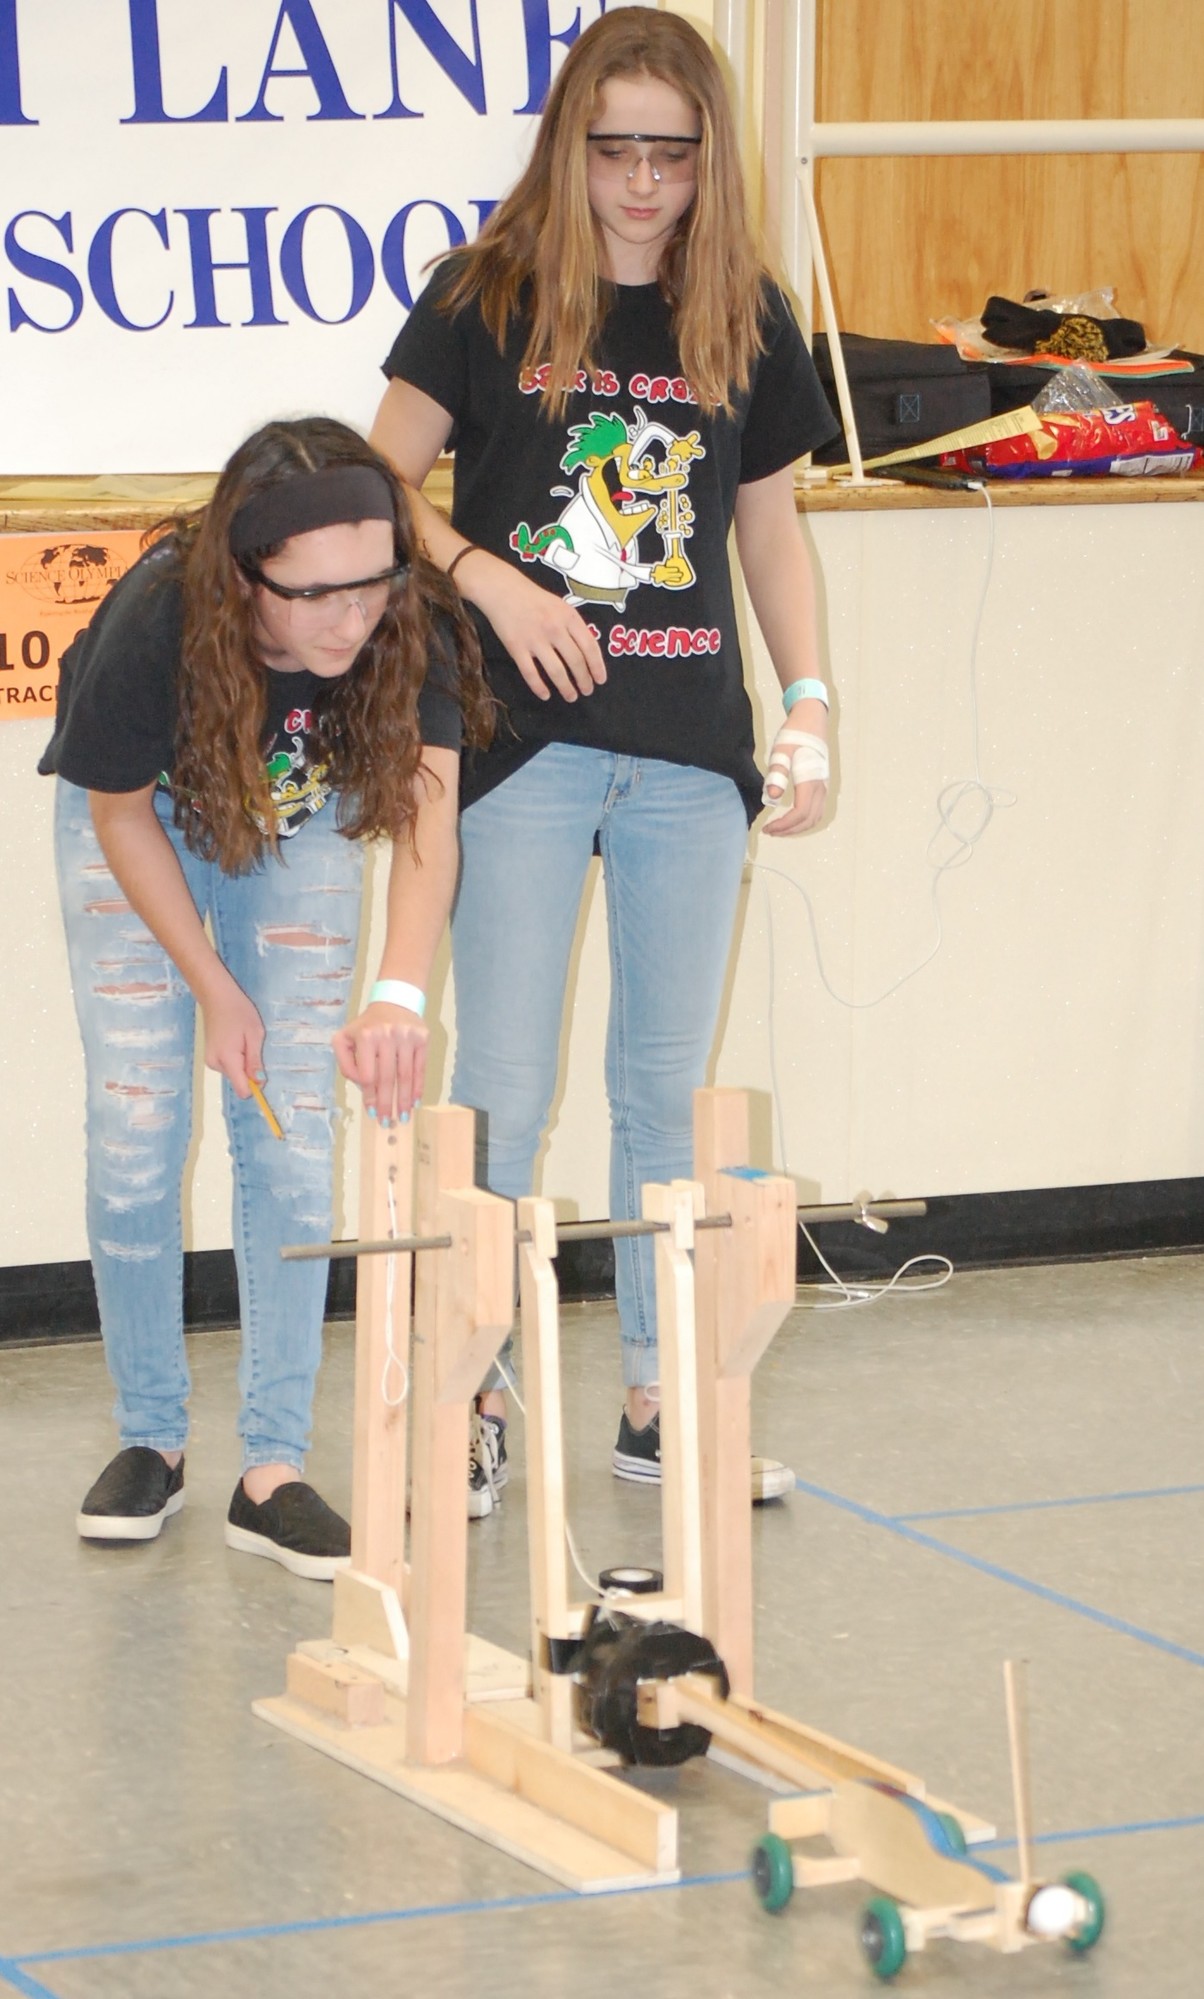 Salk Science Olympiad students Isabella Vocile, left, of Seaford, and Brady Peterson, of Wantagh, took part in the Scrambler event.